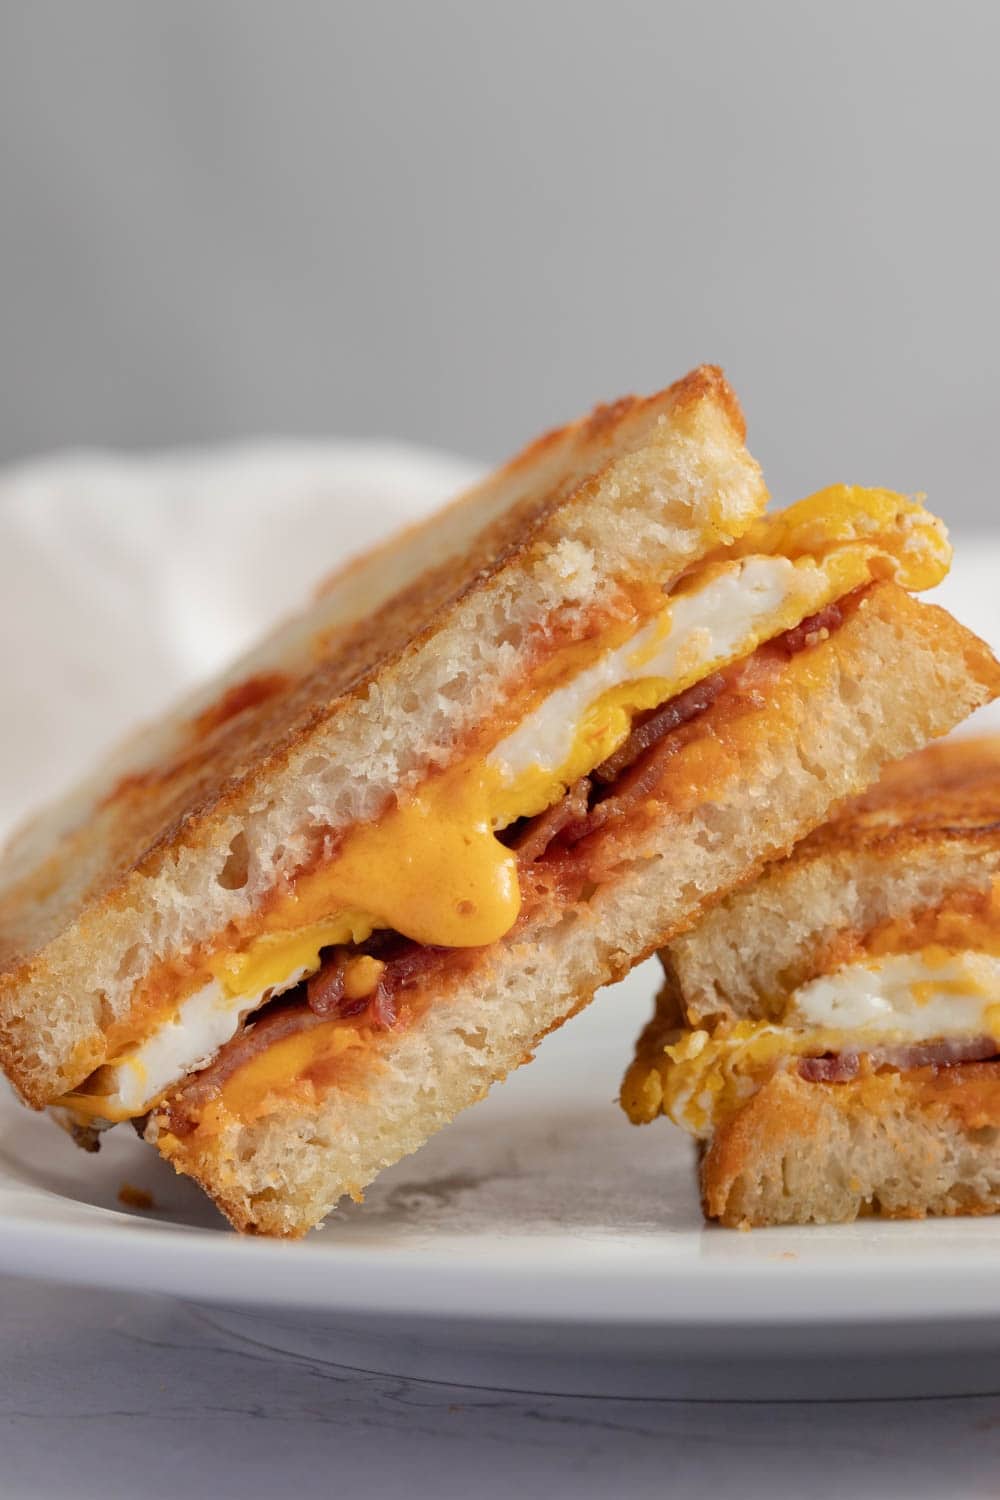 Fried Egg Sandwich with Bacon and Cheese